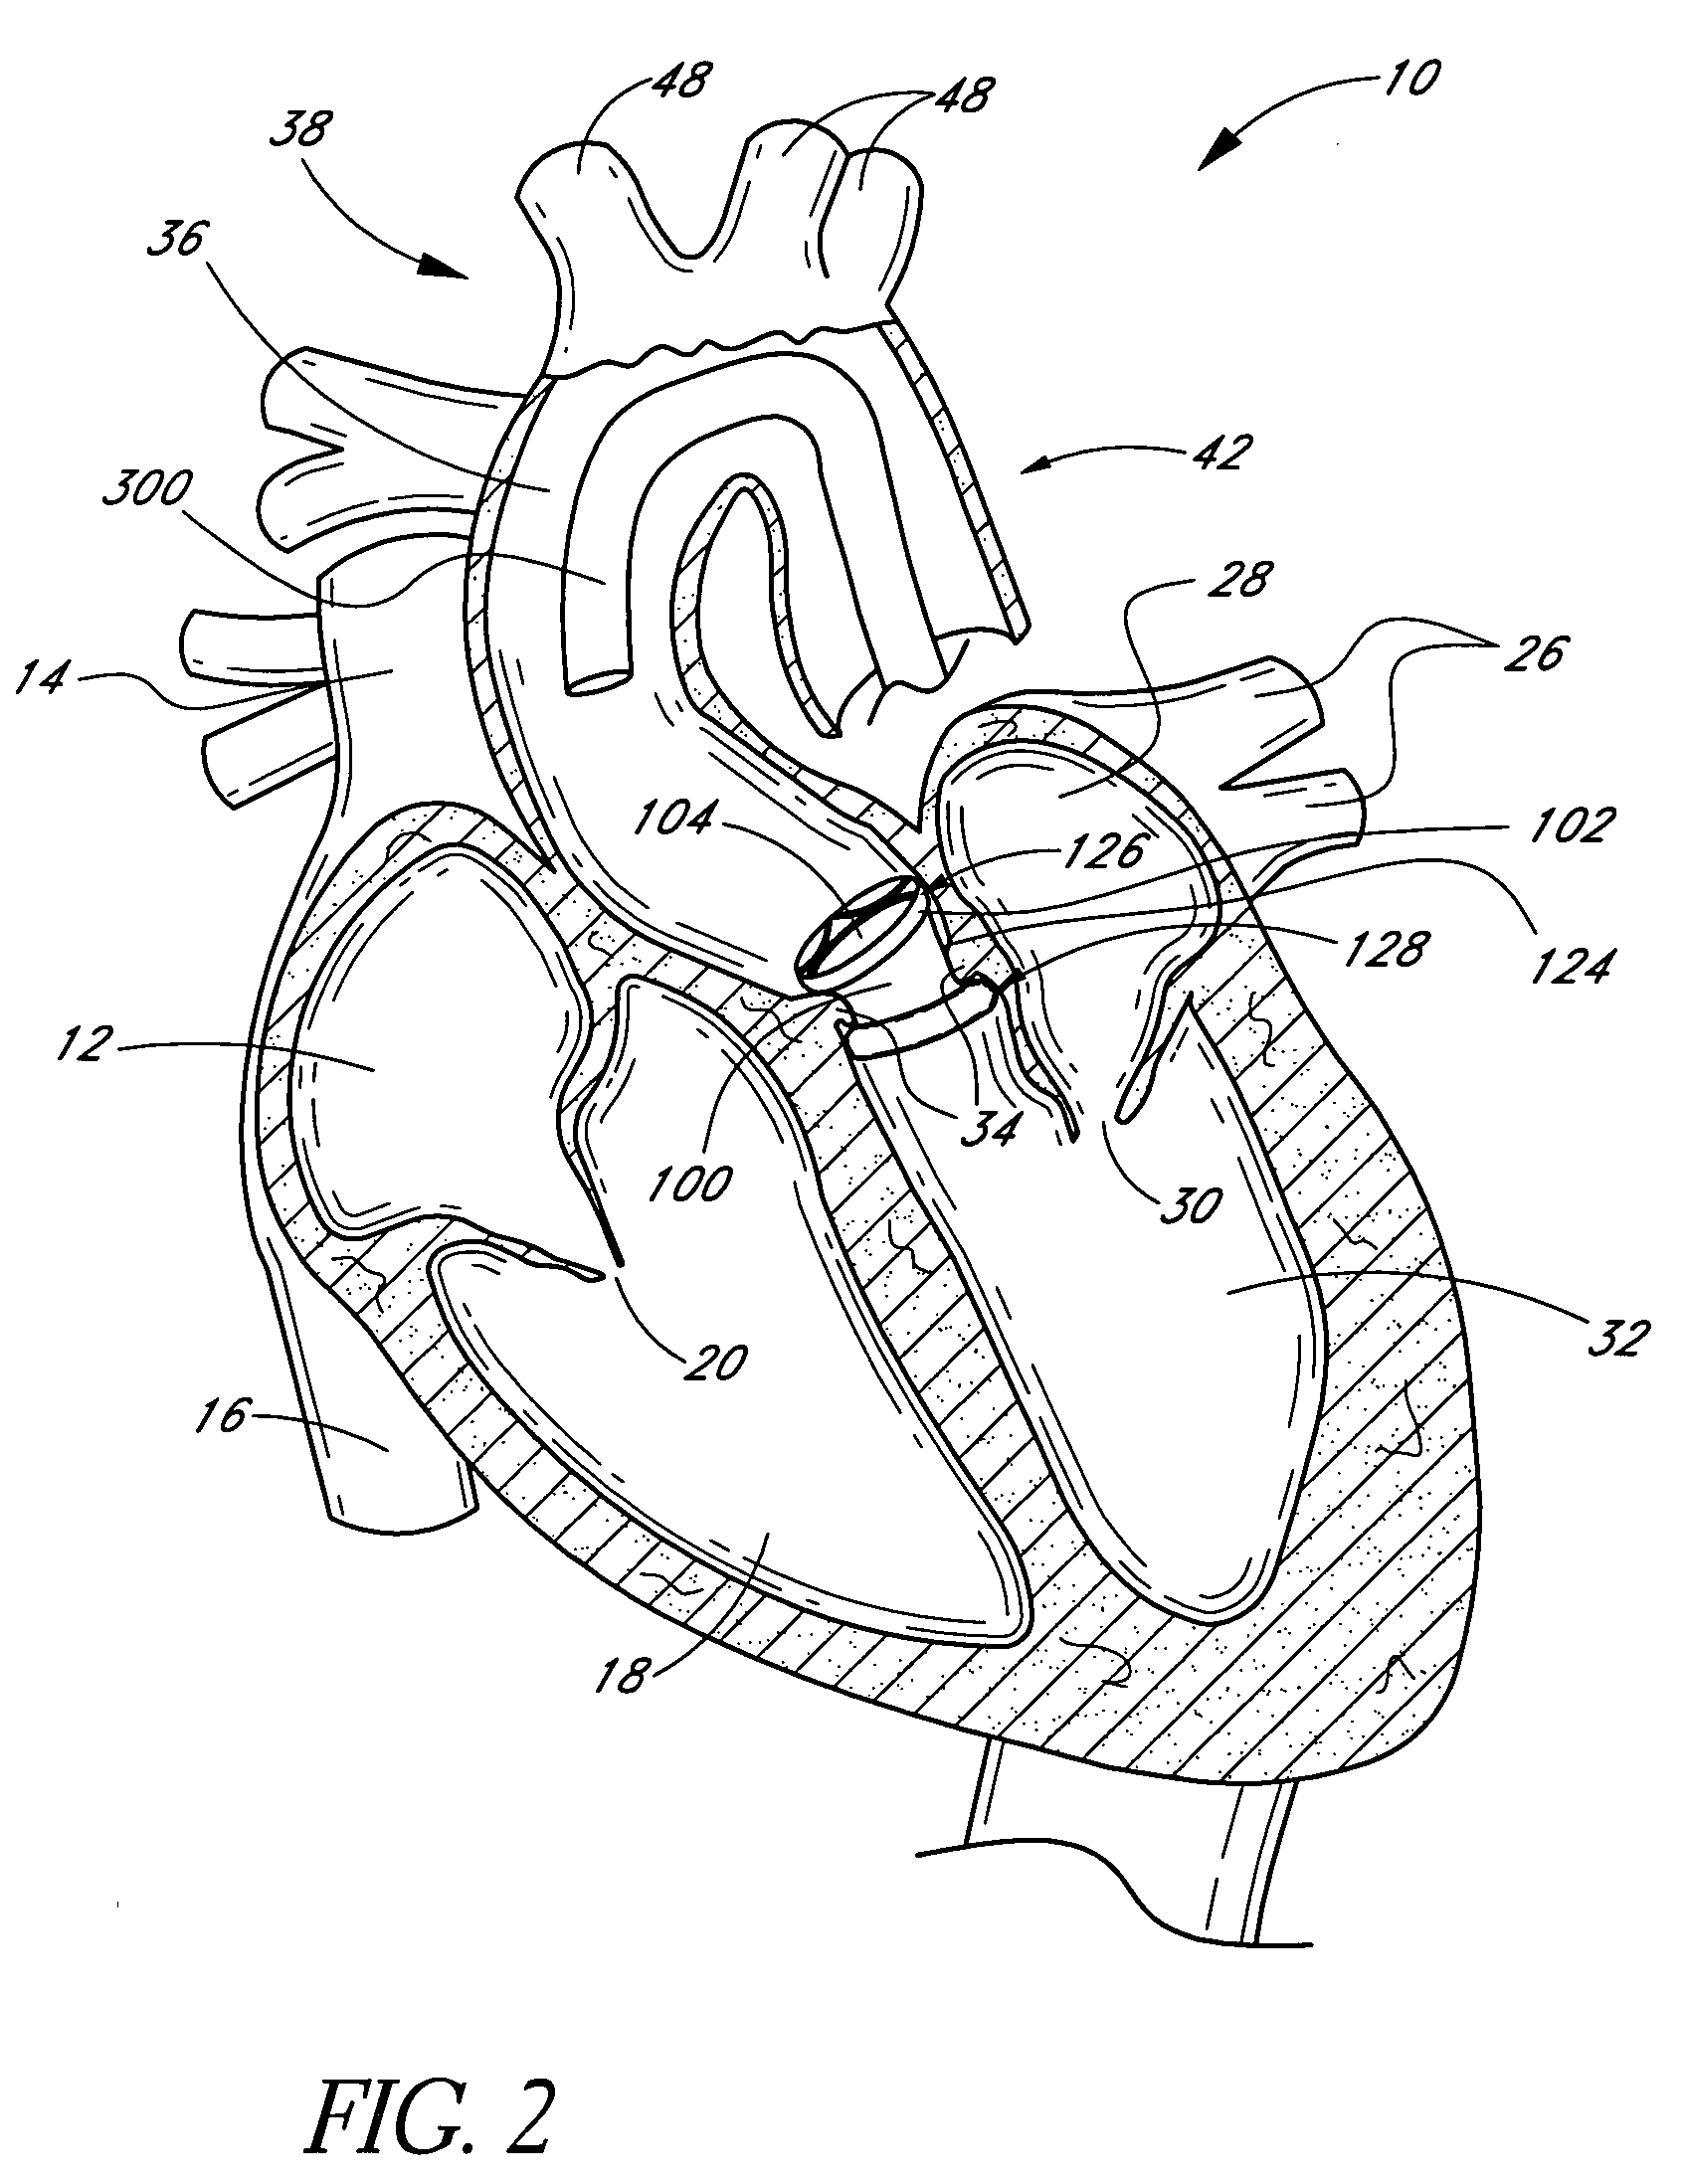 Method of in situ formation of translumenally deployable heart valve support